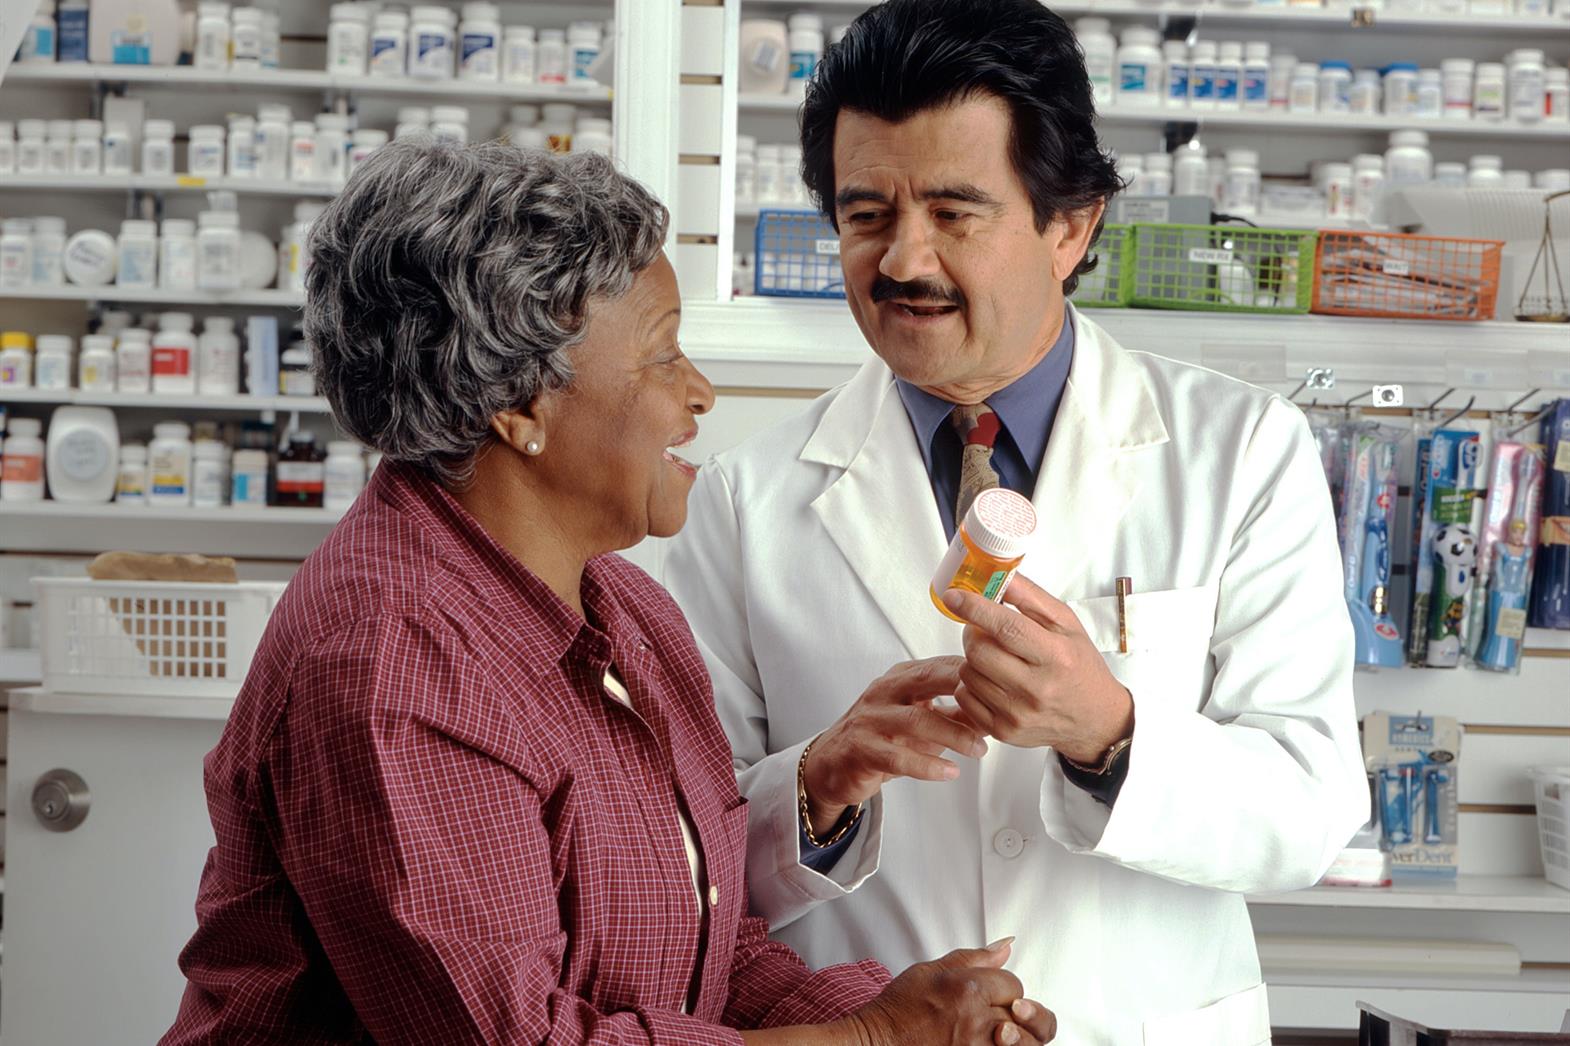 Male pharmacist speaking to an elderly woman about a medication bottle